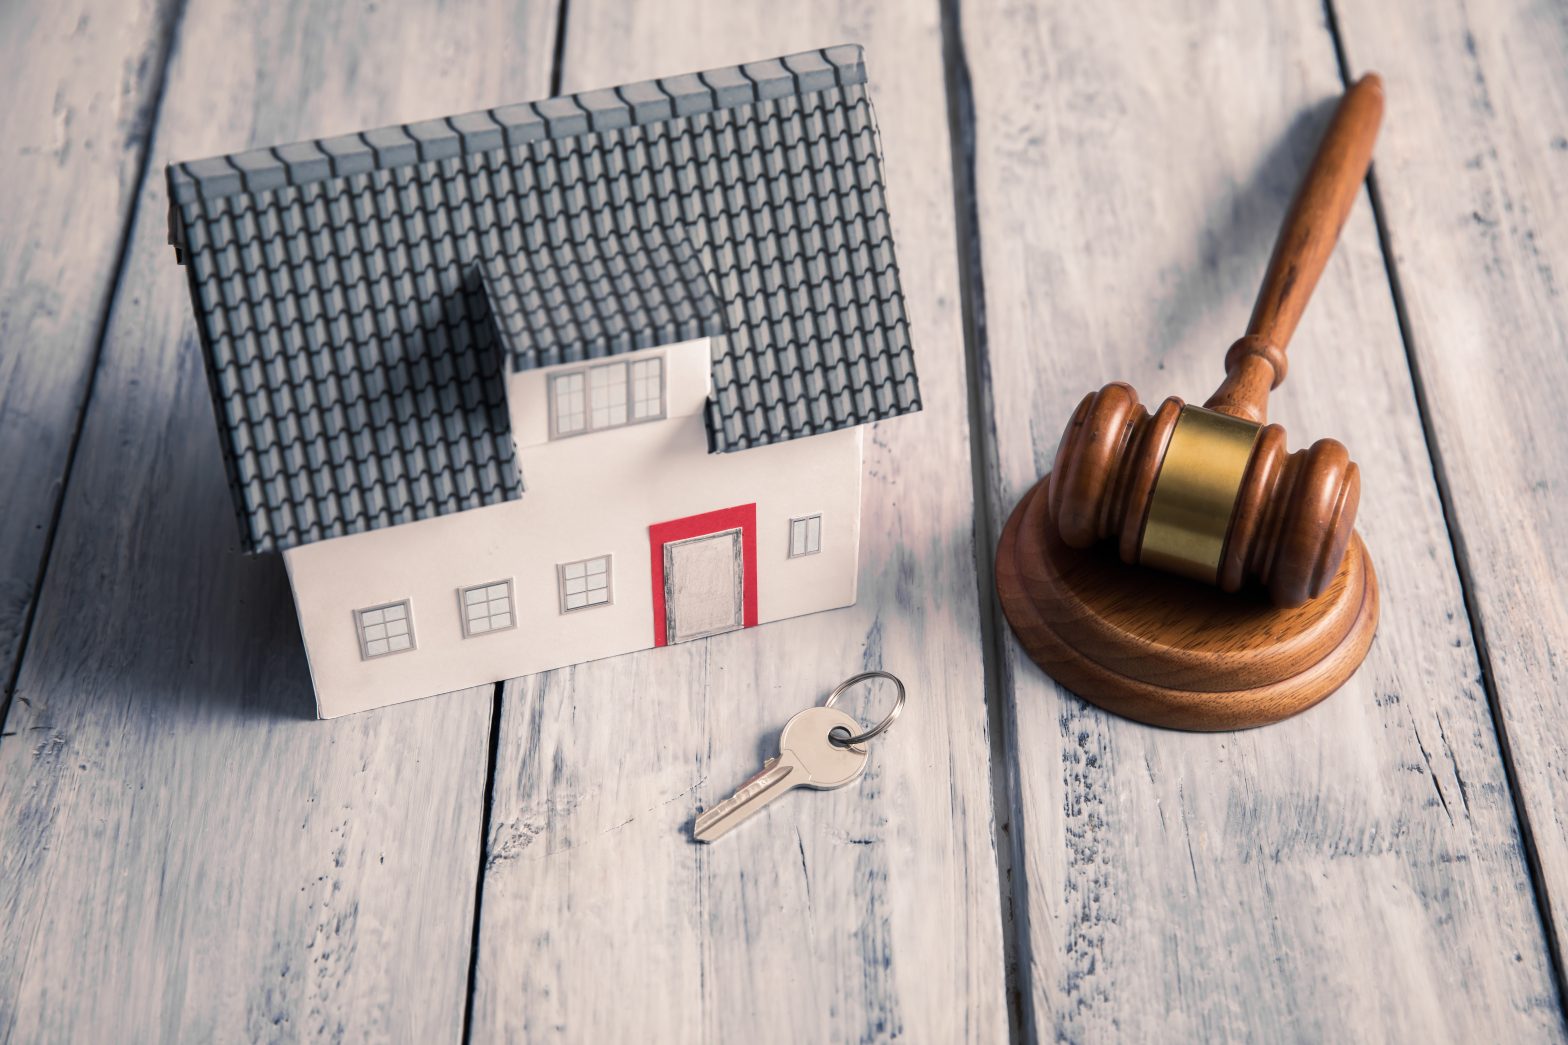 Property auction purchase, key and gavel